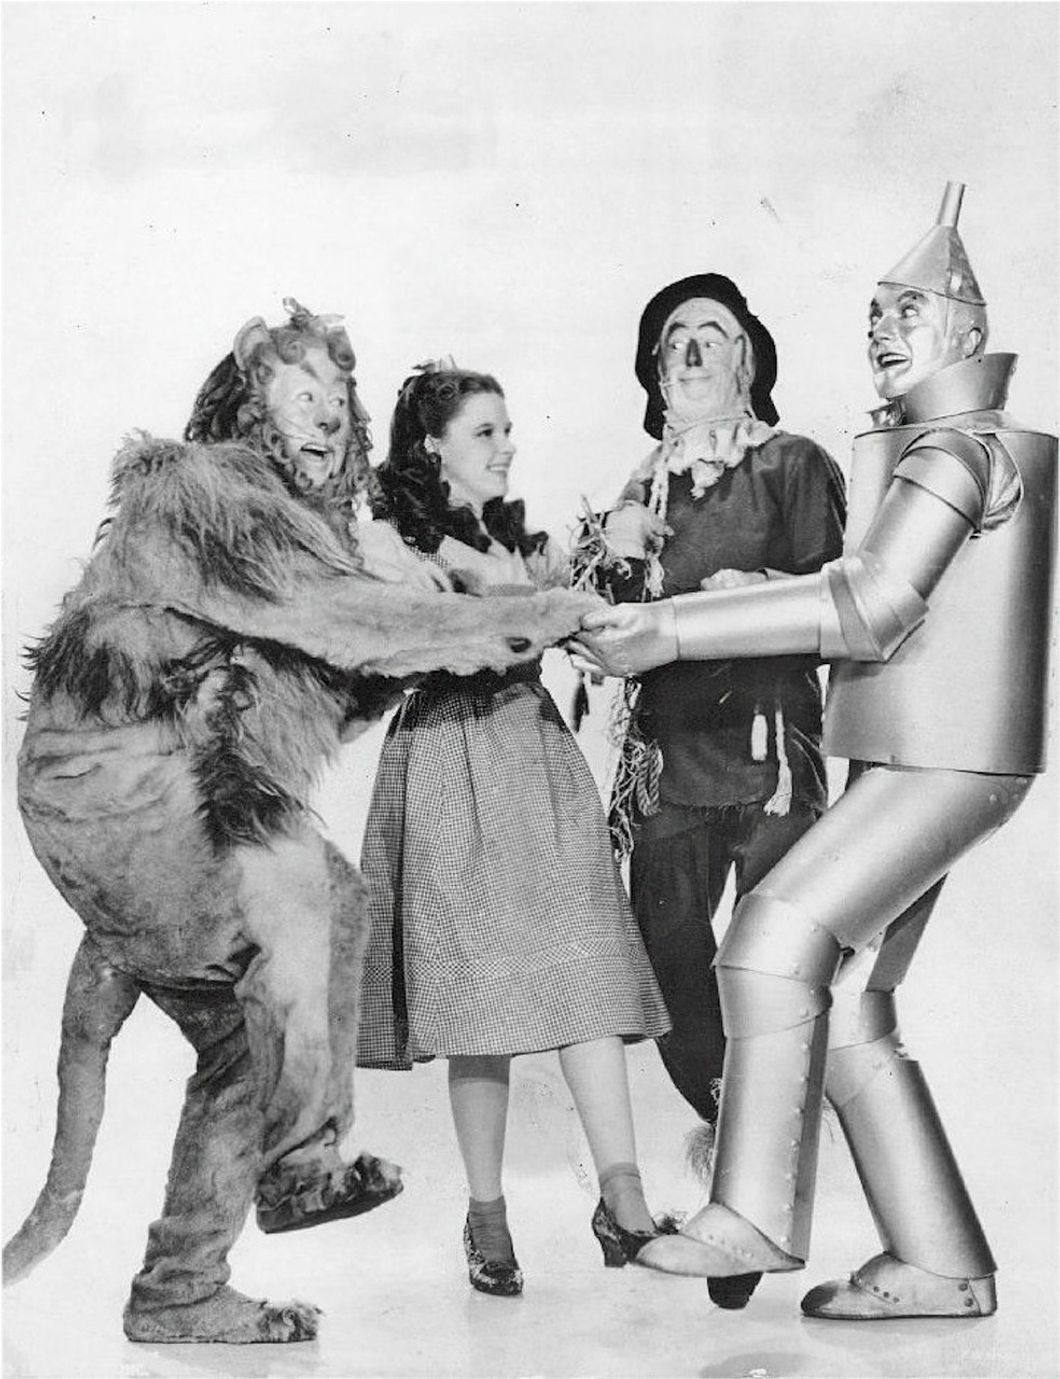 4 characters from "The Wizard of Oz"